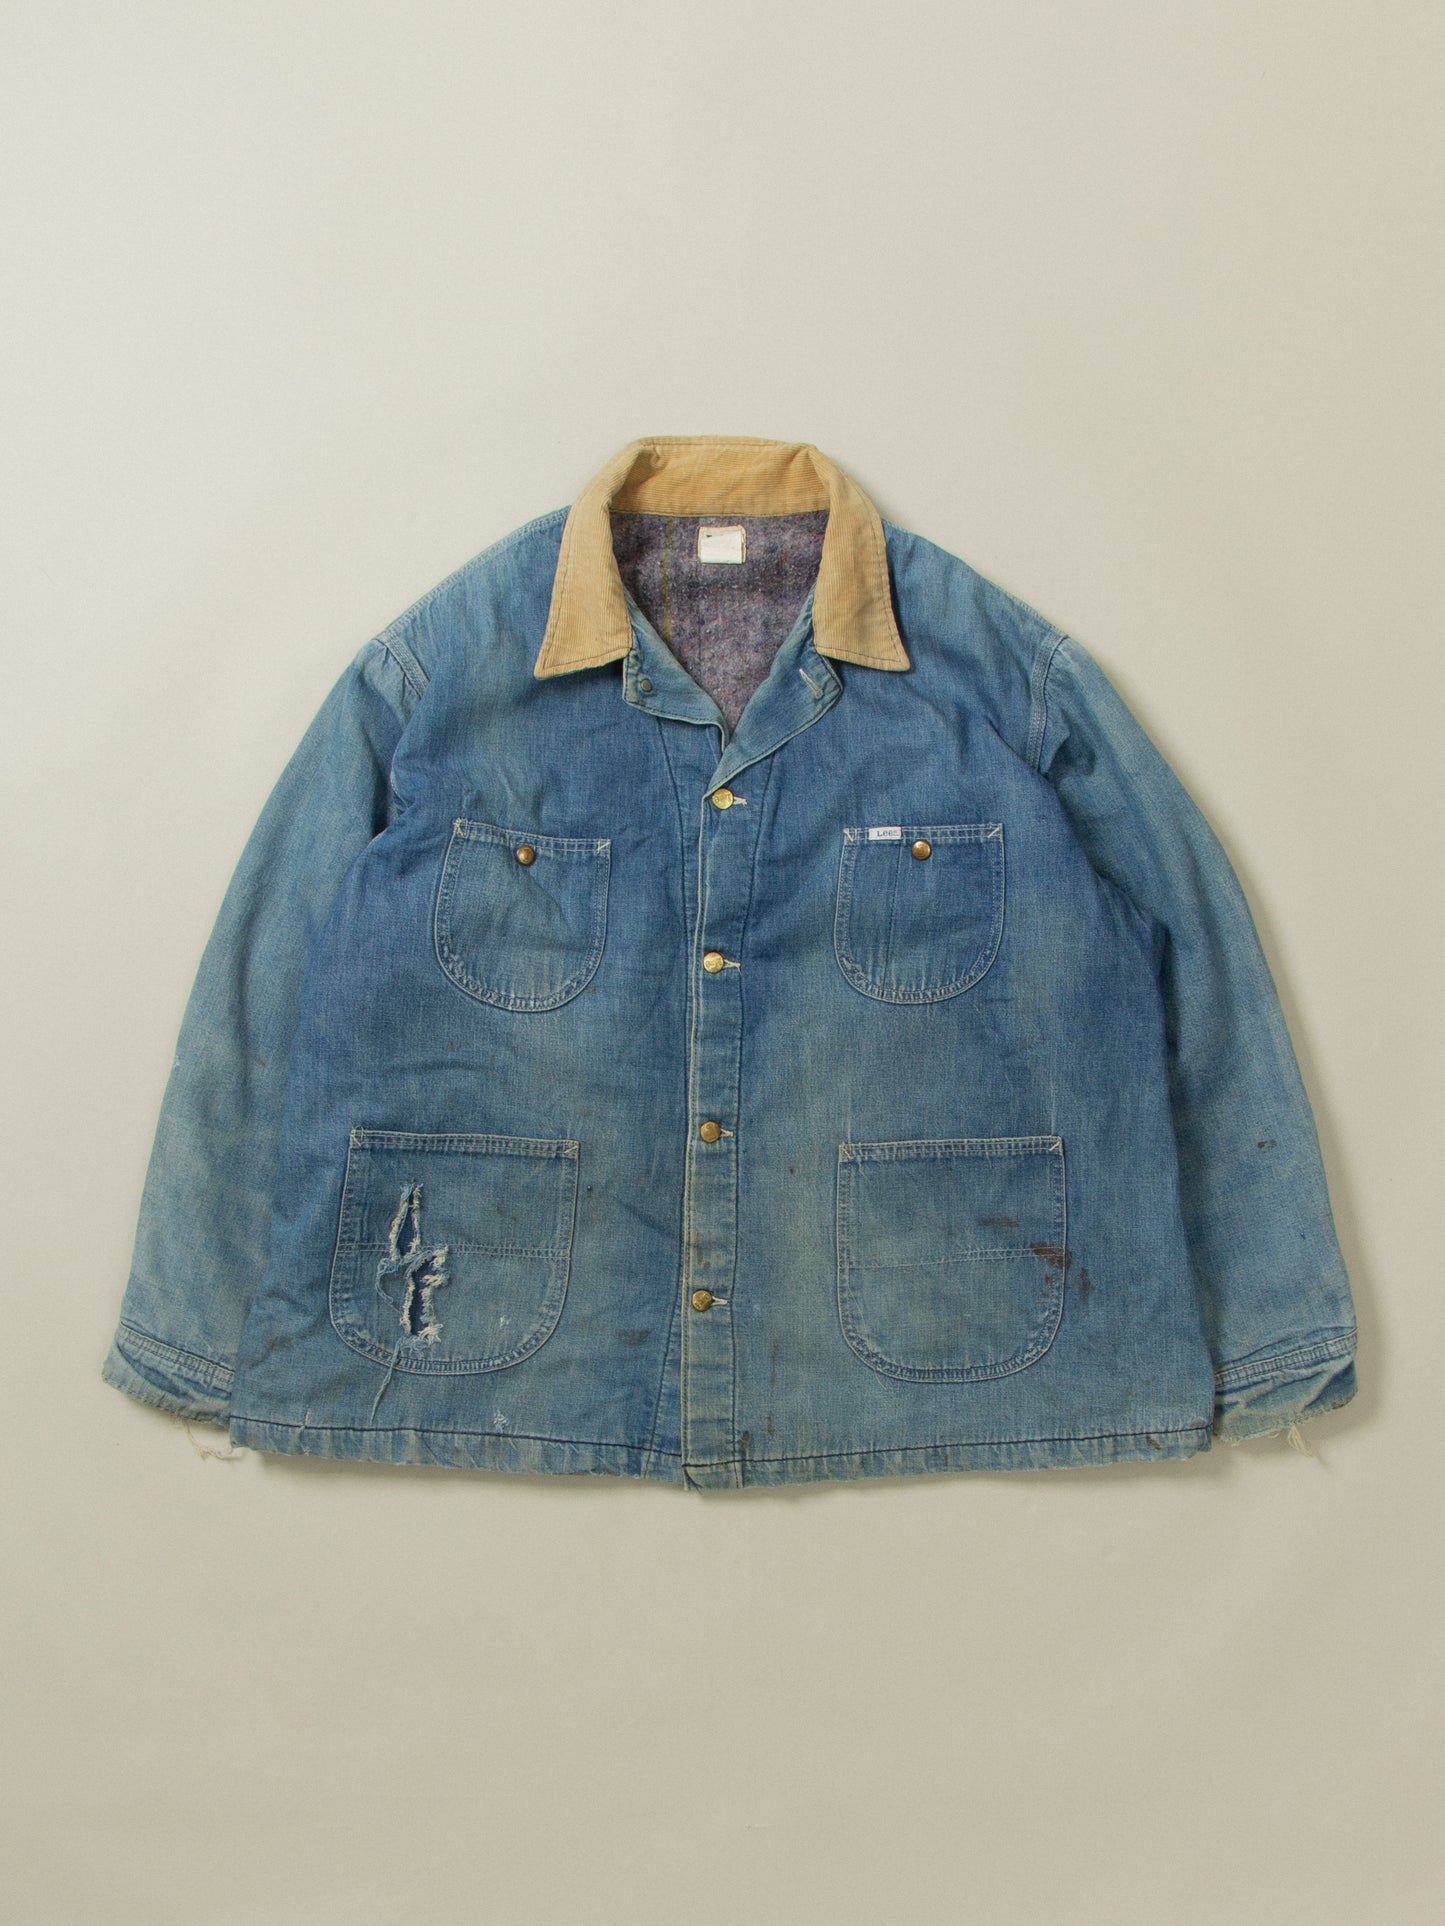 Vtg 1970s Lined Lee Chore Denim Jacket - Made in USA (XXL)